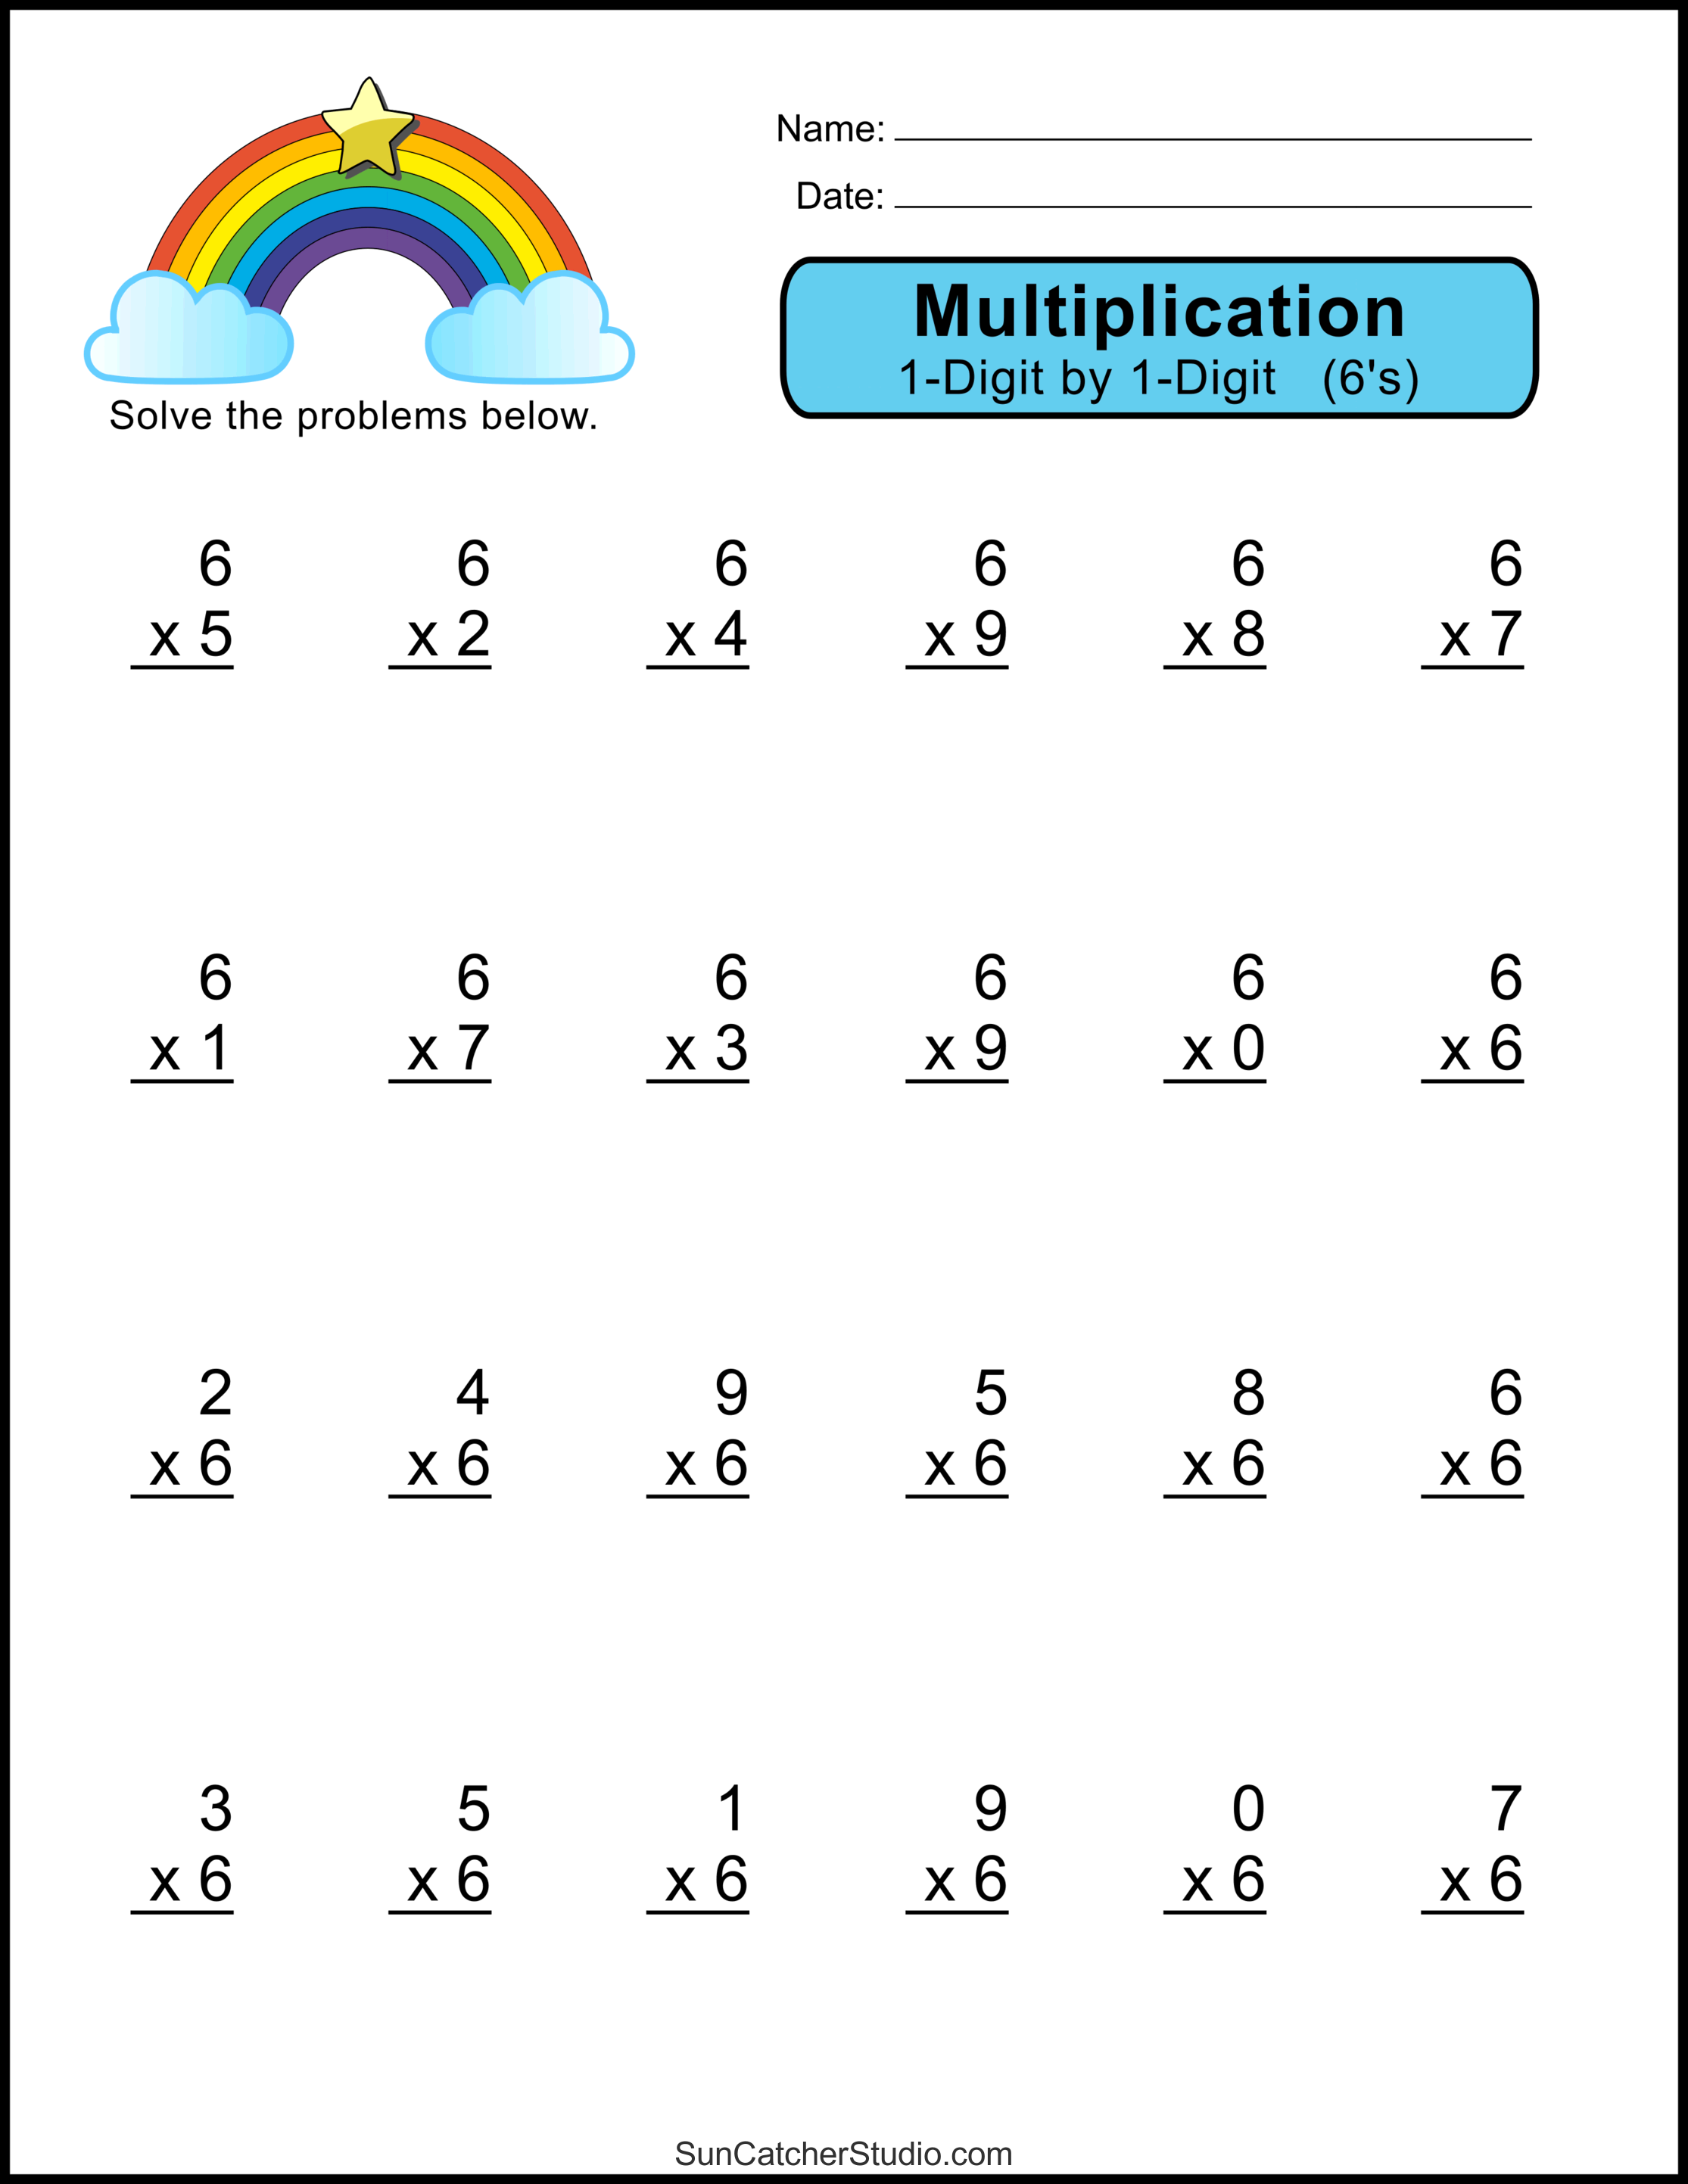 multiplication-worksheets-one-digit-math-drills-diy-projects-patterns-monograms-designs